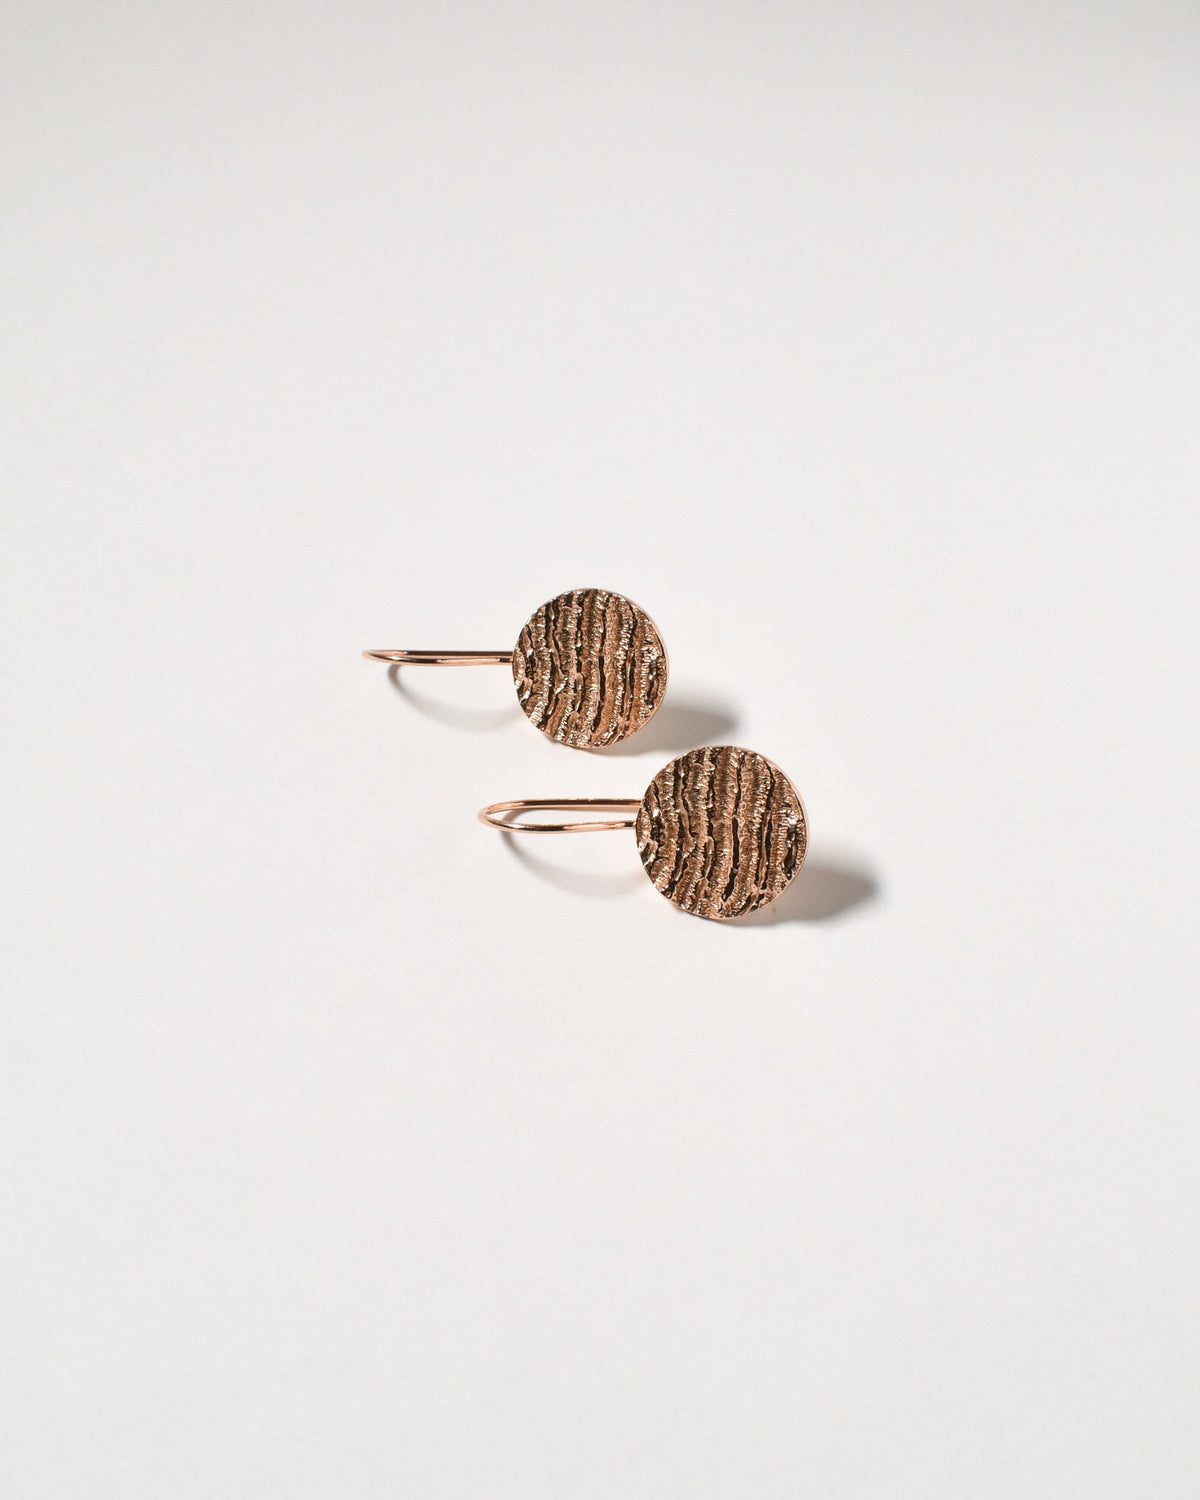 Kutti Earrings, Rose Gold Plated